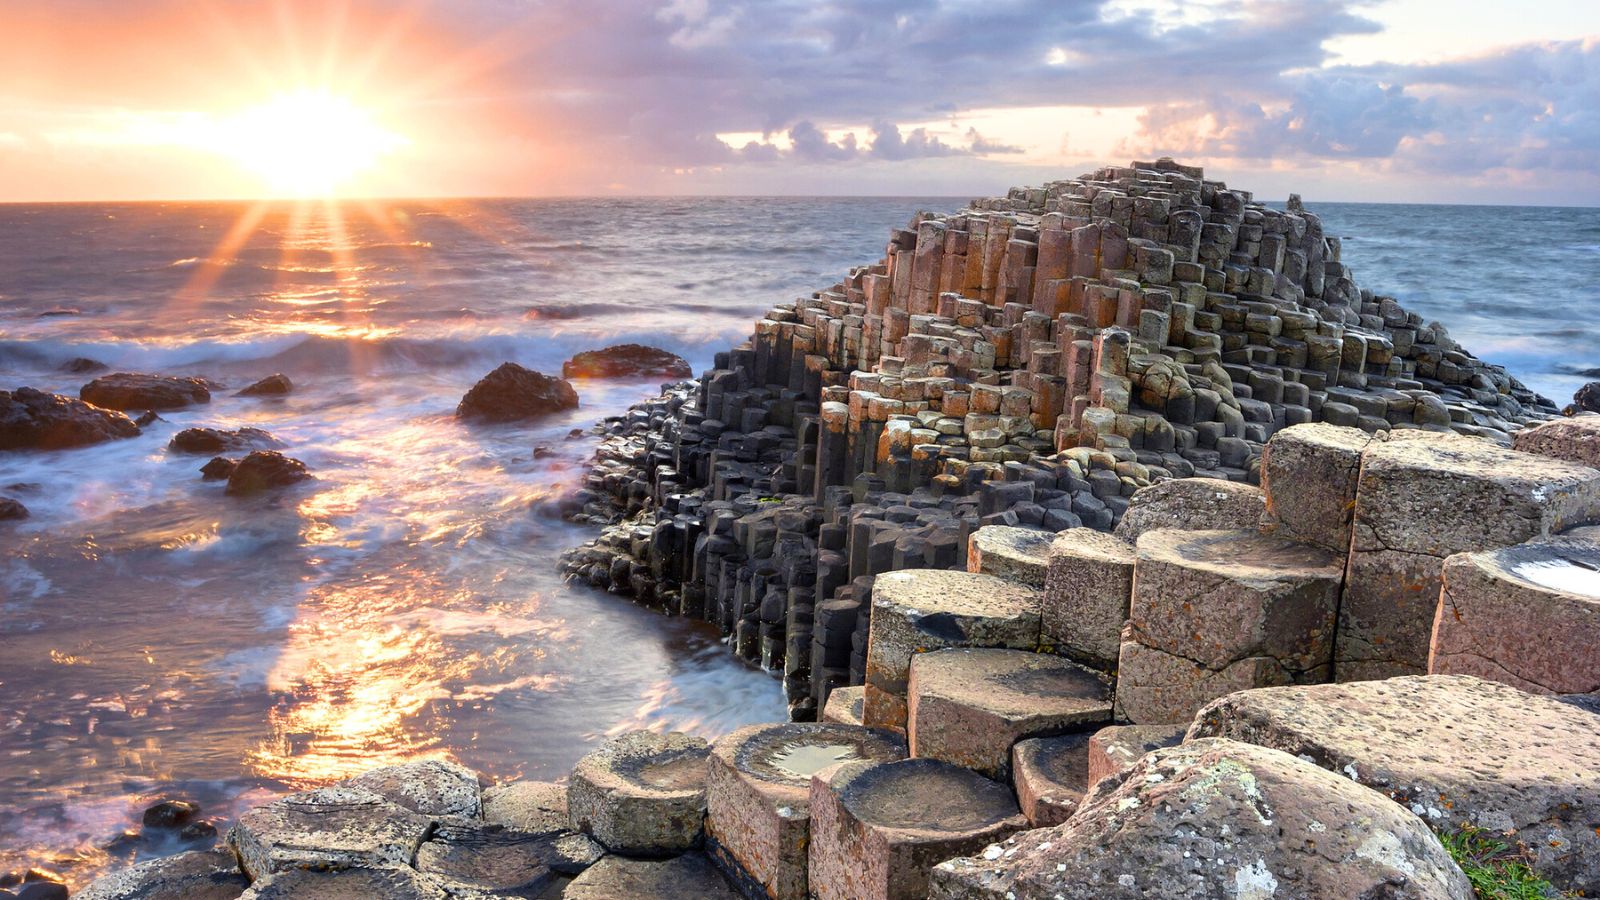 <p>An iconic location comprised of 40,000 interlocking columns, Giant’s Causeway is one of the most popular attractions in Northern Ireland.</p><p>The location of this UNESCO World Heritage site is epic, too. Massive cliffs provide an atmospheric backdrop, and the stormy North Atlantic Ocean stretches to the horizon. Wild and windy walks blessed with dramatic coastal views are the order of the day here.</p>